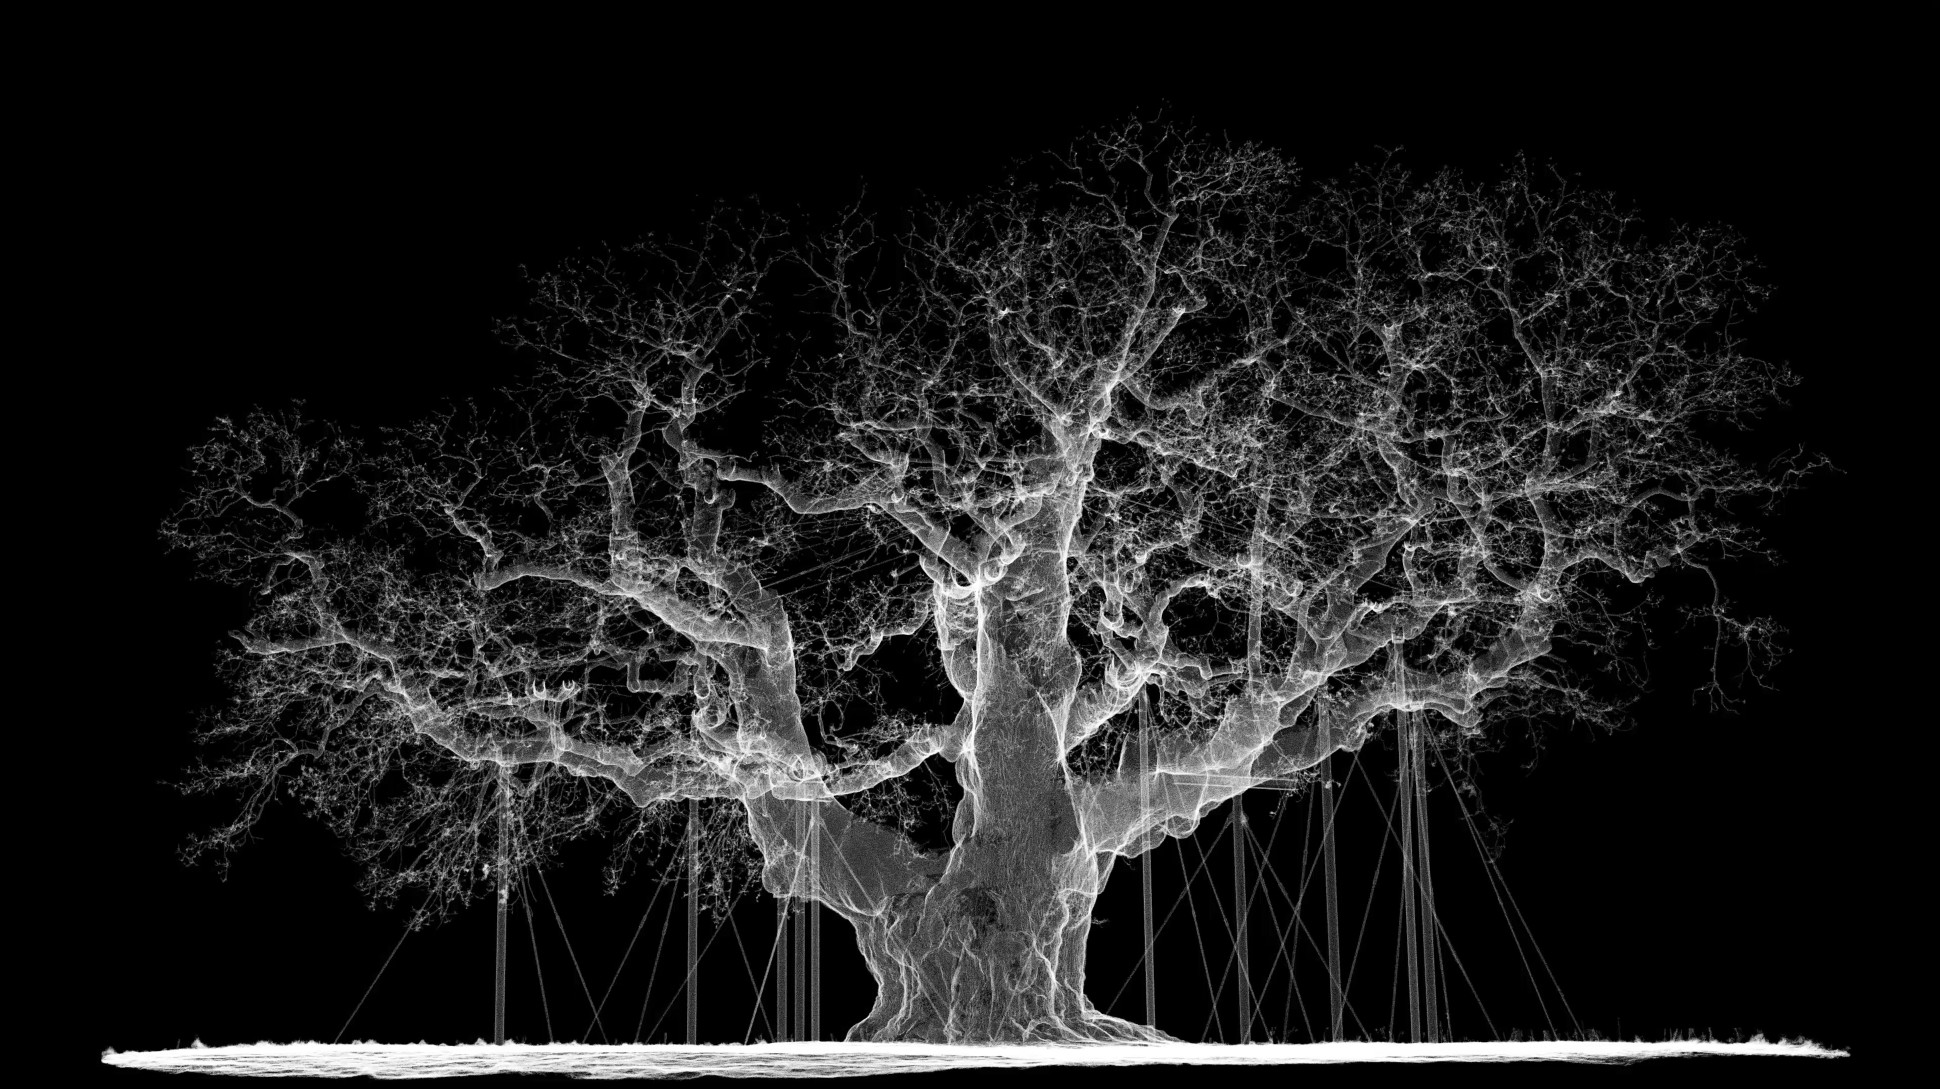 A large tree rendered in white against a black background